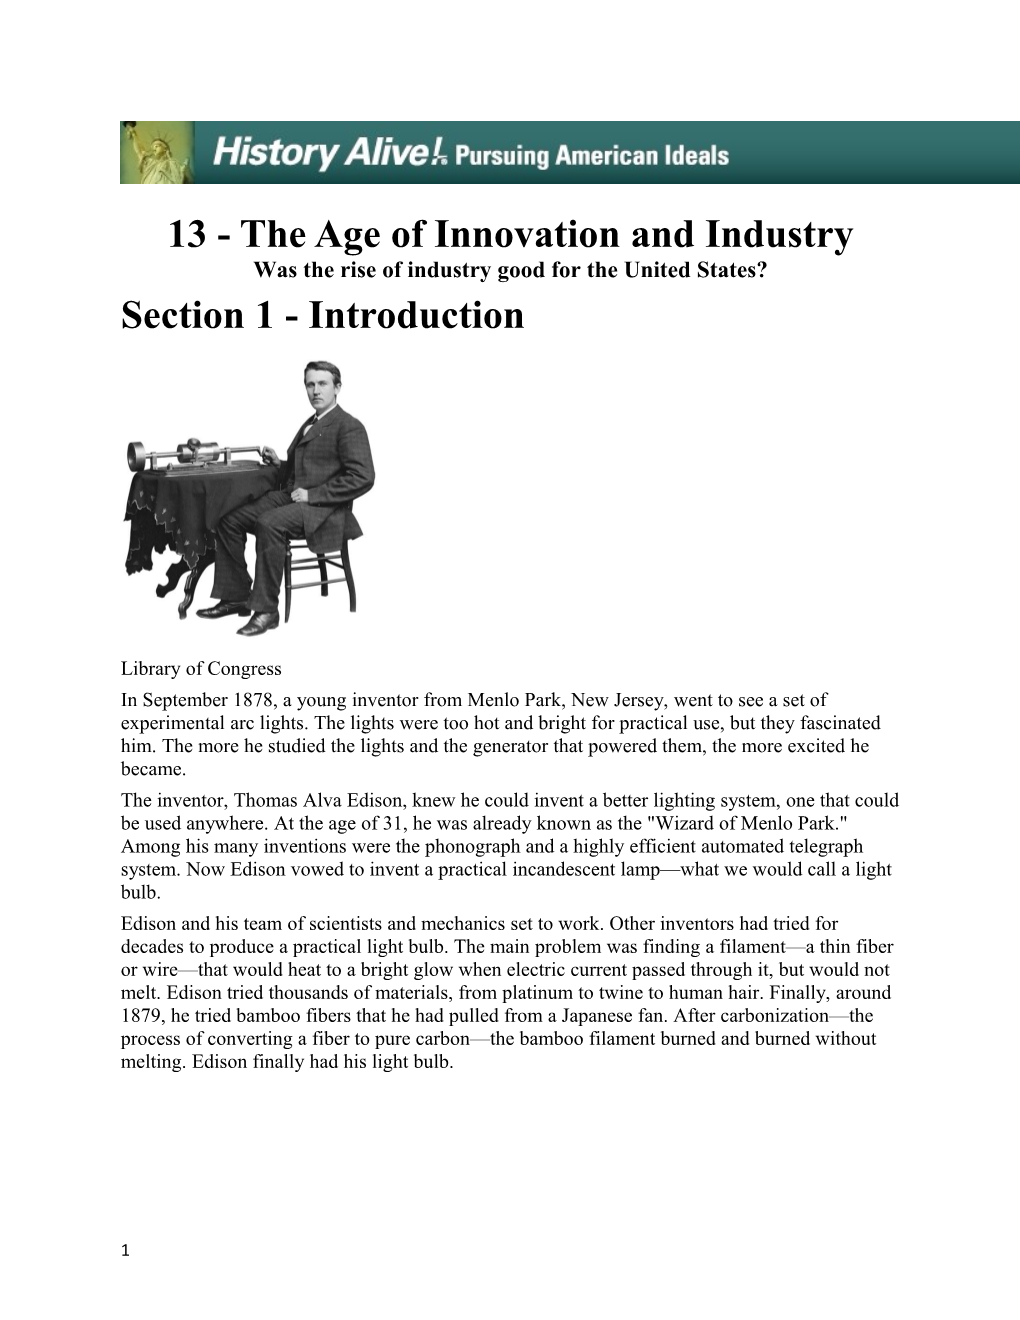 13 - the Age of Innovation and Industry Was the Rise of Industry Good for the United States?